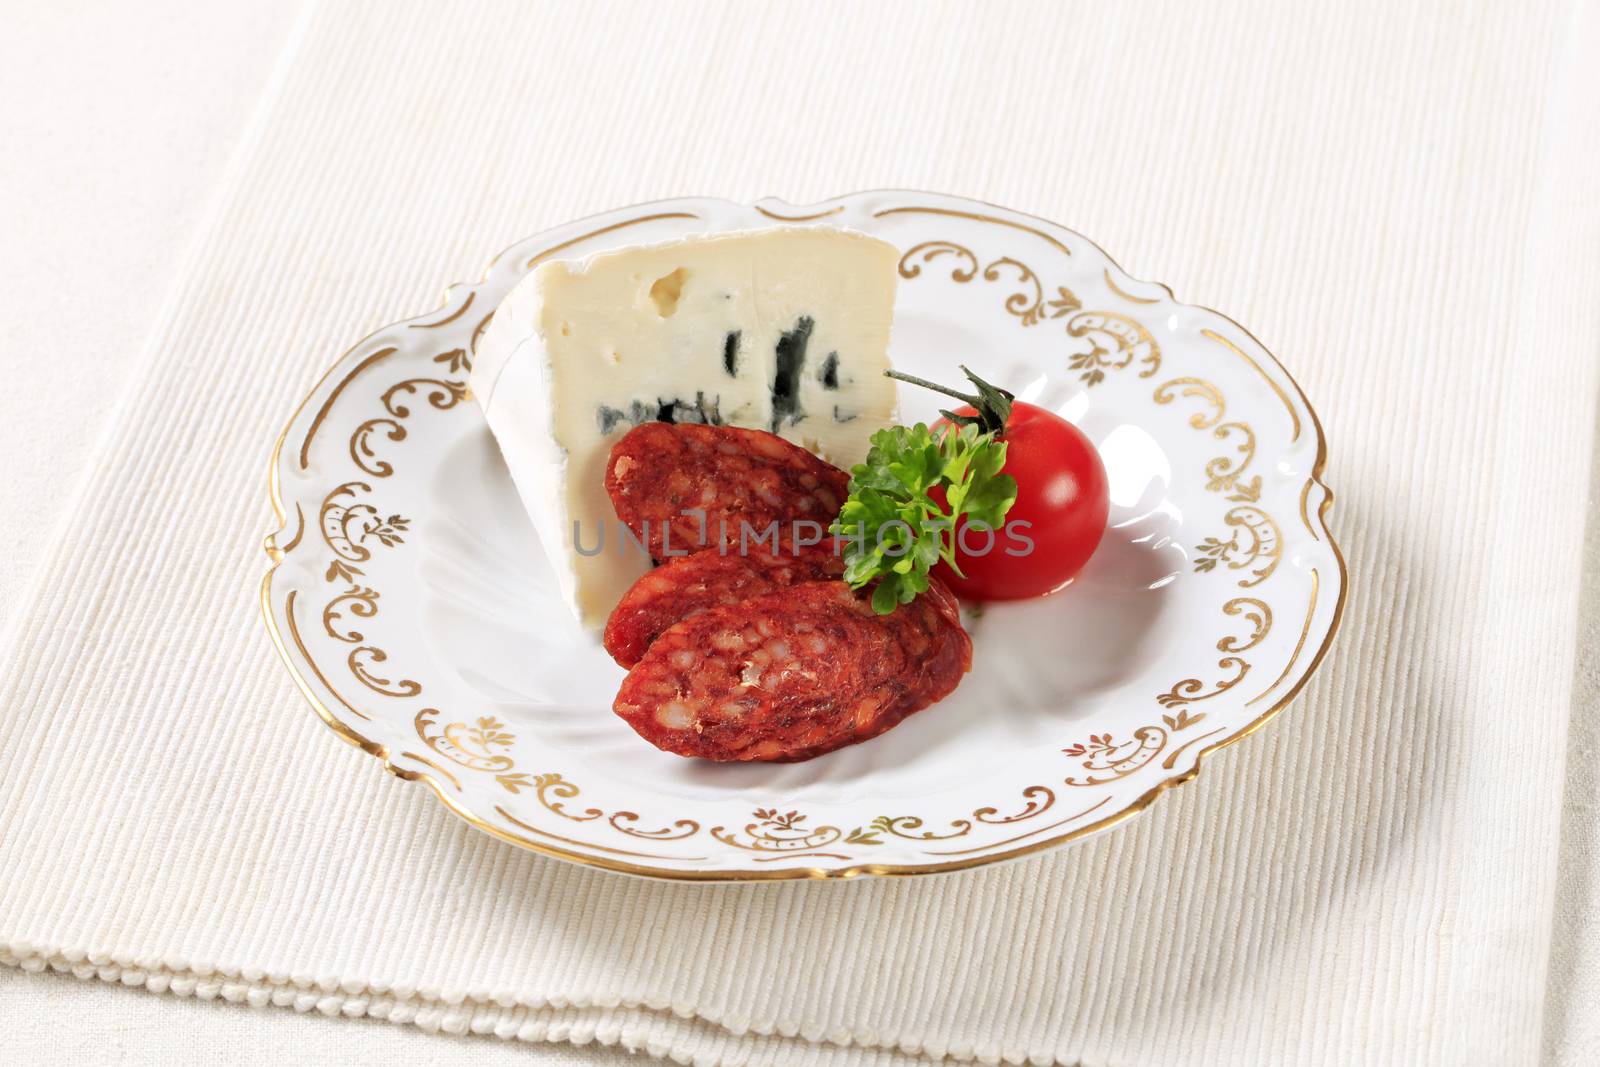 Blue cheese and slices of spicy sausage